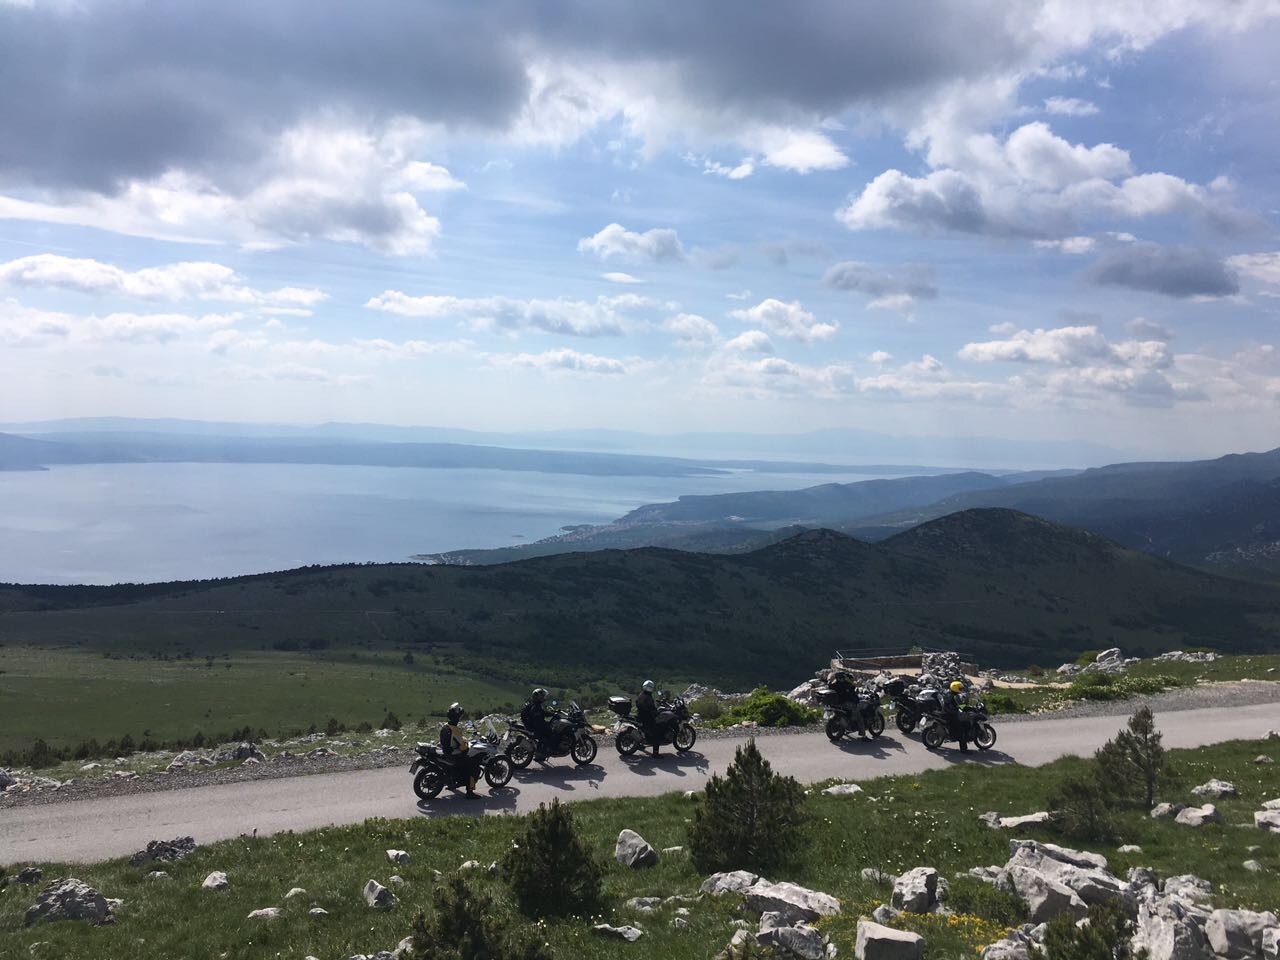 The Balkans of Europe: Mystery, History, and Motorcycle Trippin'